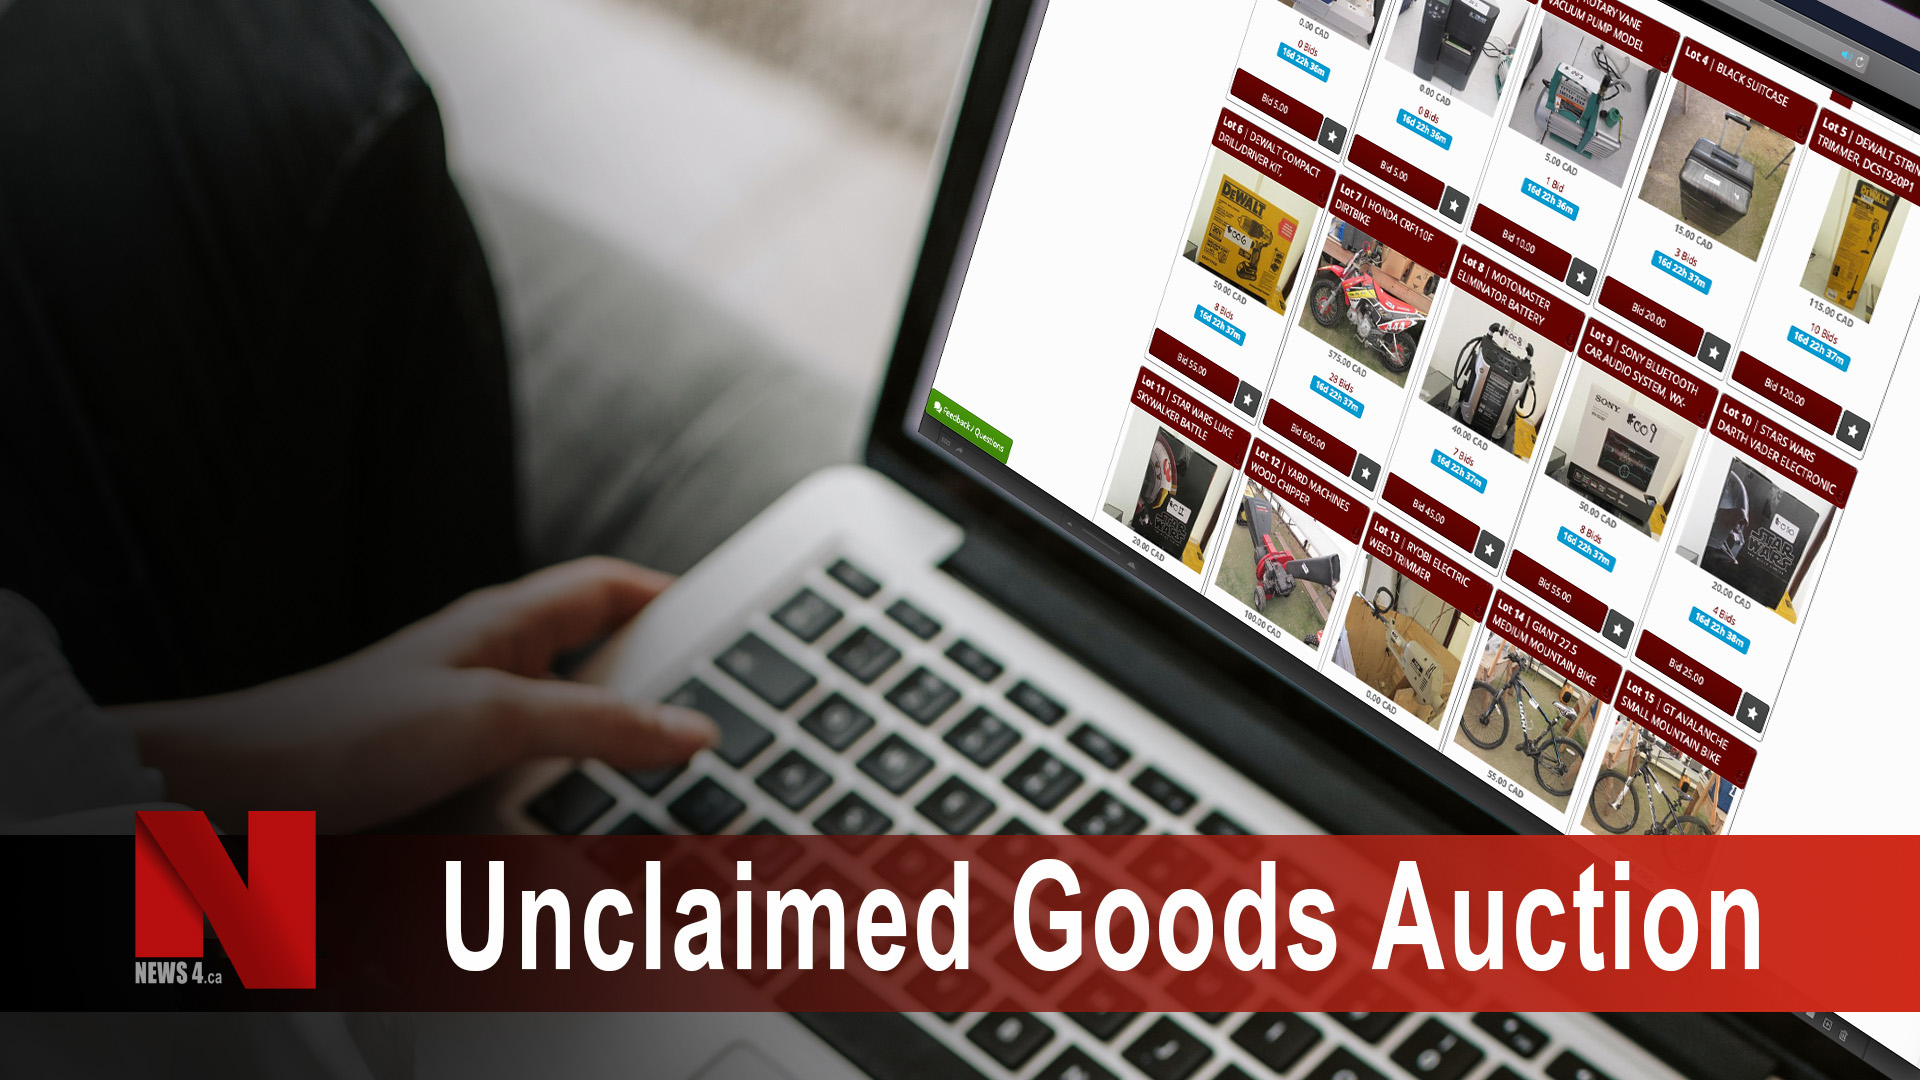 Unclaimed goods auction